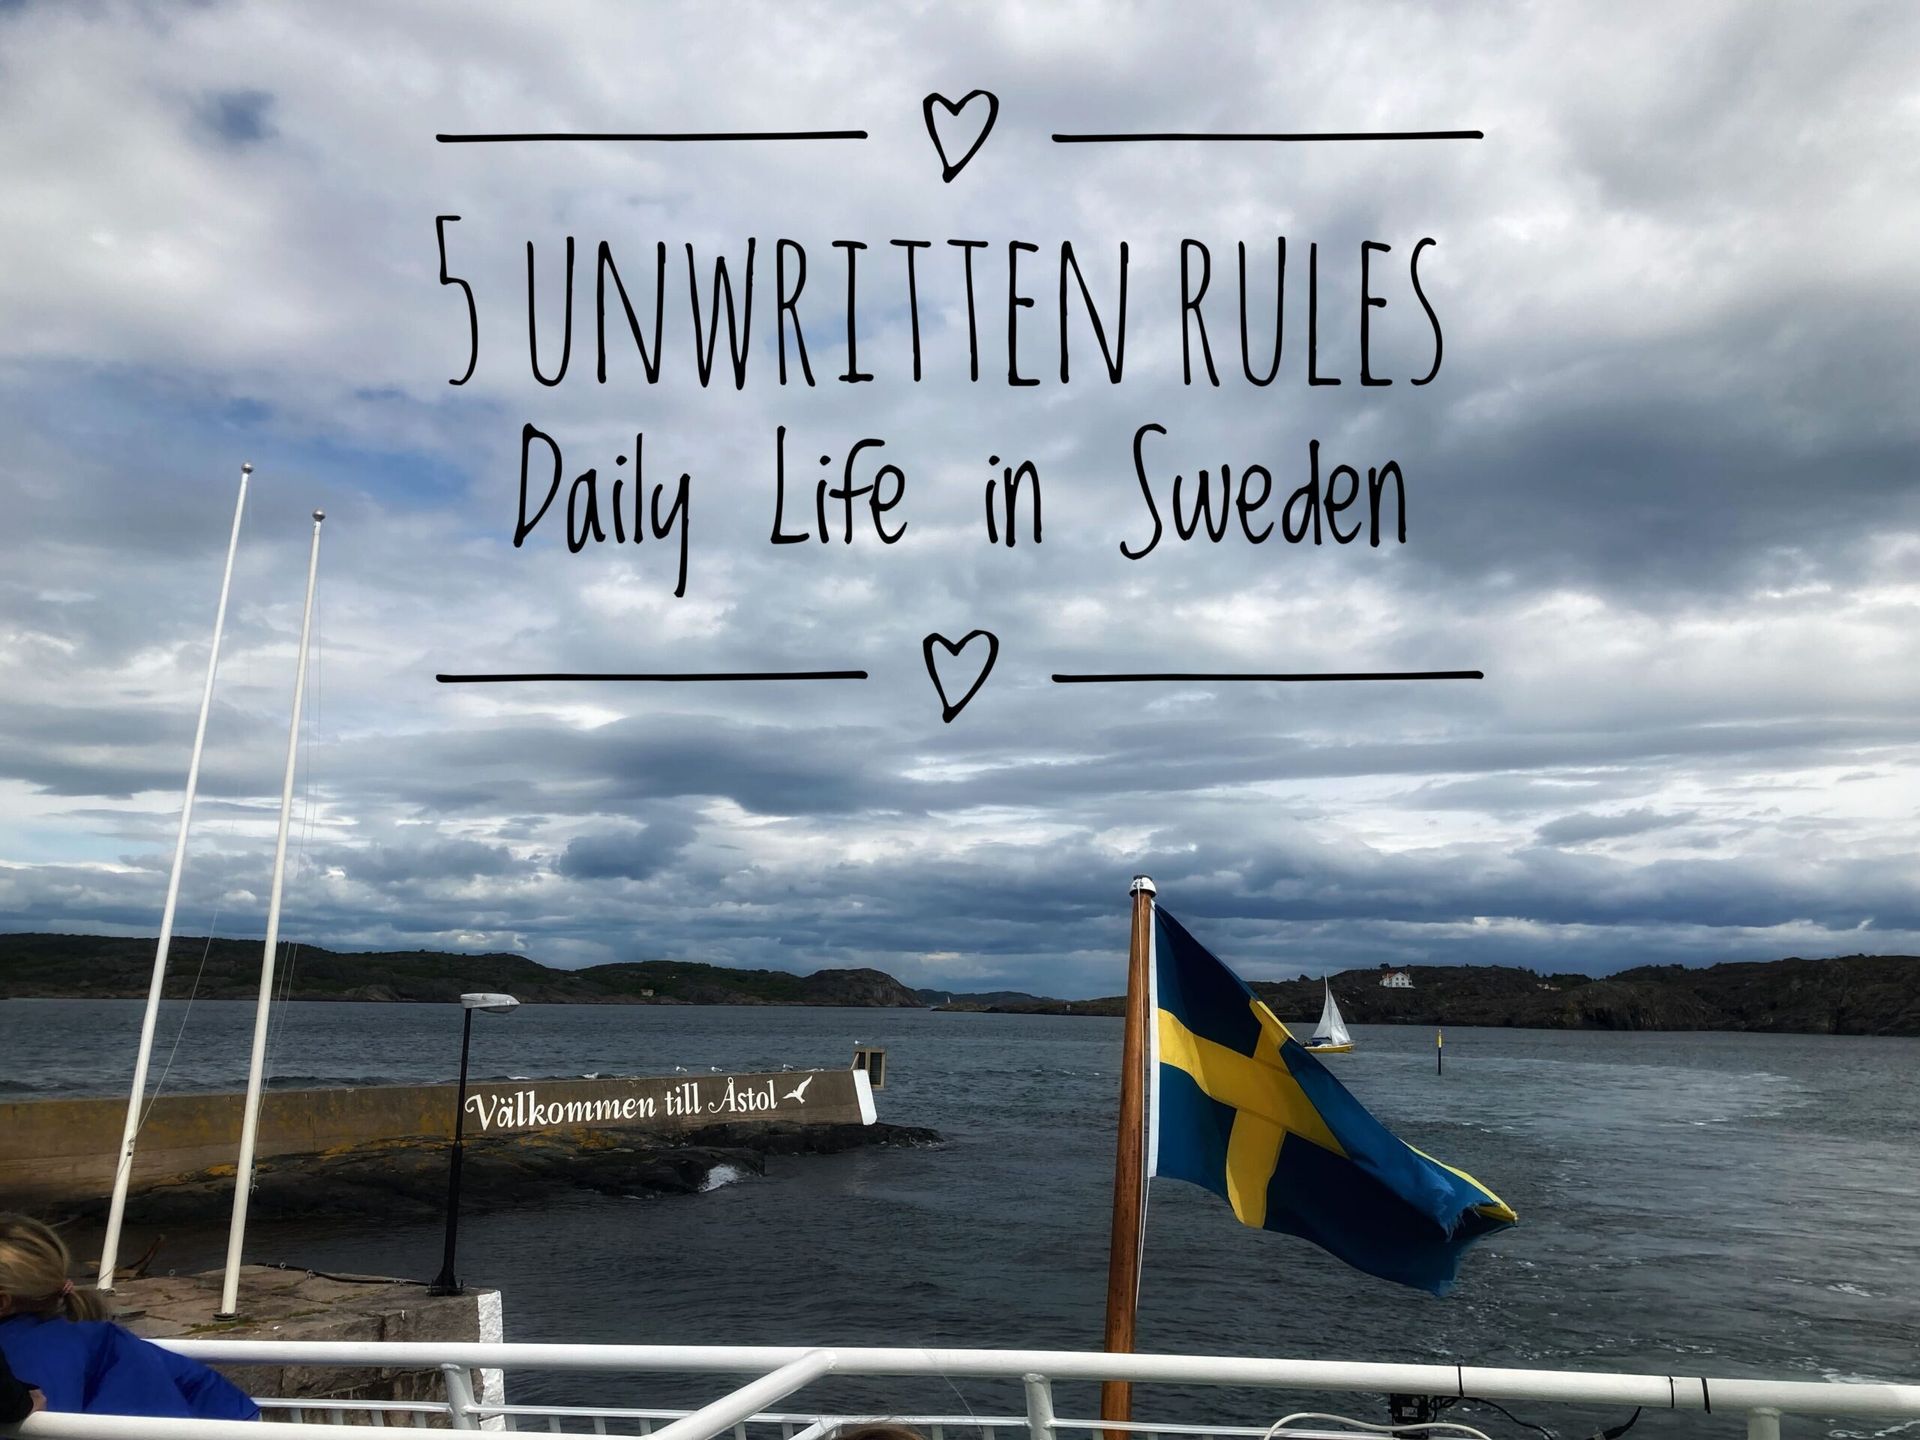 A photo taken on a cloudy day by a port where a Swedish flag can be seen flapping in the wind. The blog's title "5 Unwritten Rules - Daily Life in Sweden" is placed on the top of the image.